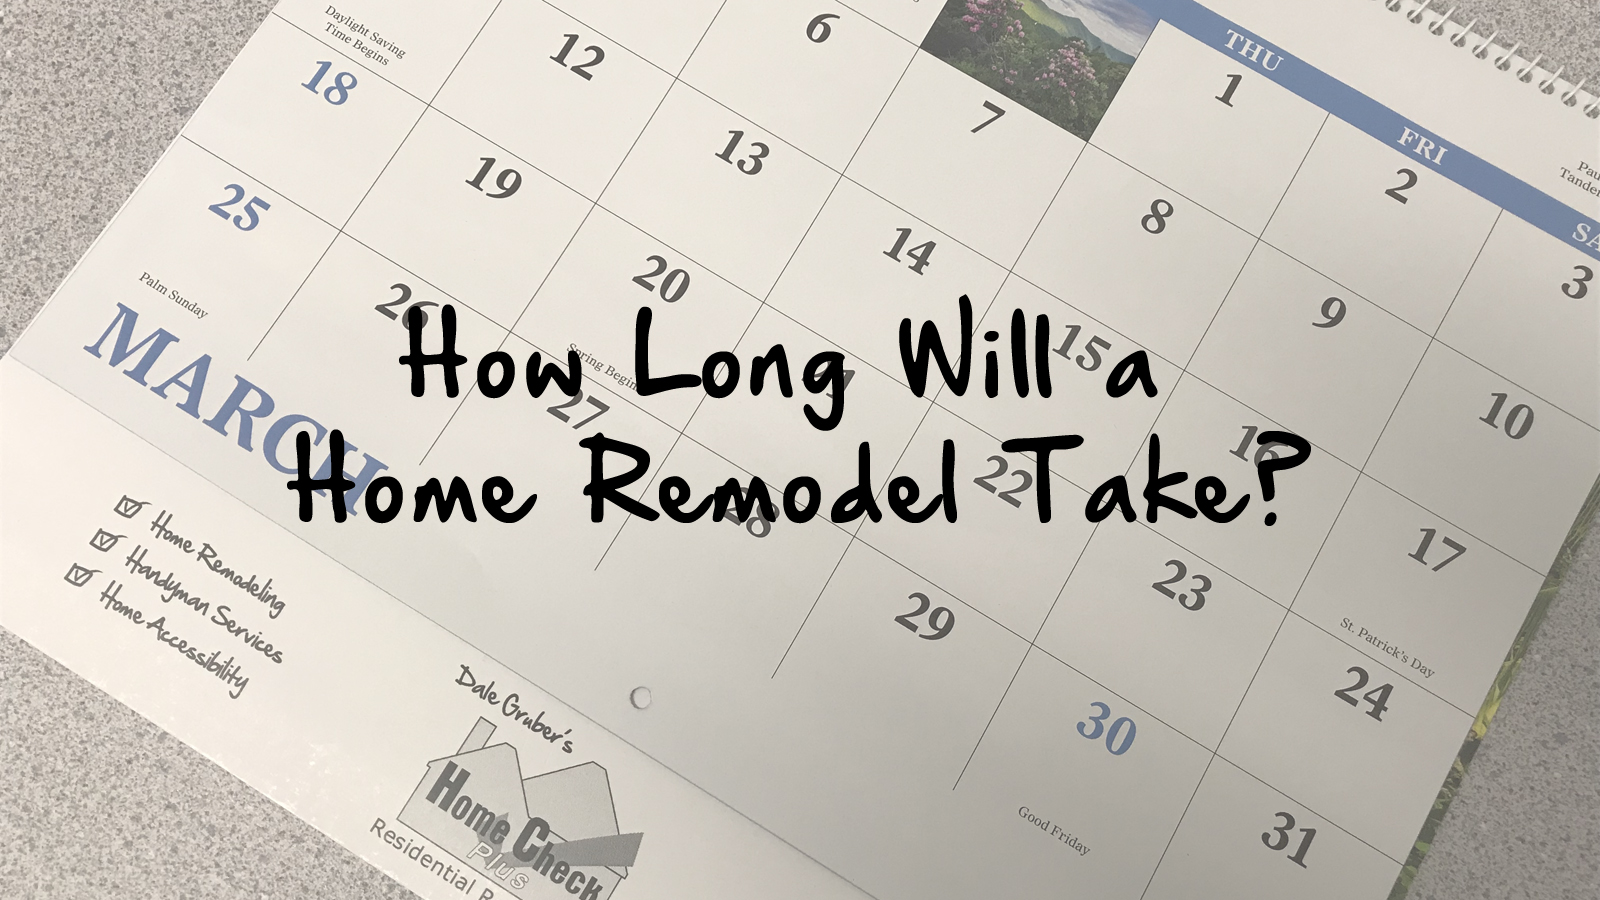 How Long Will a Home Remodel Take?